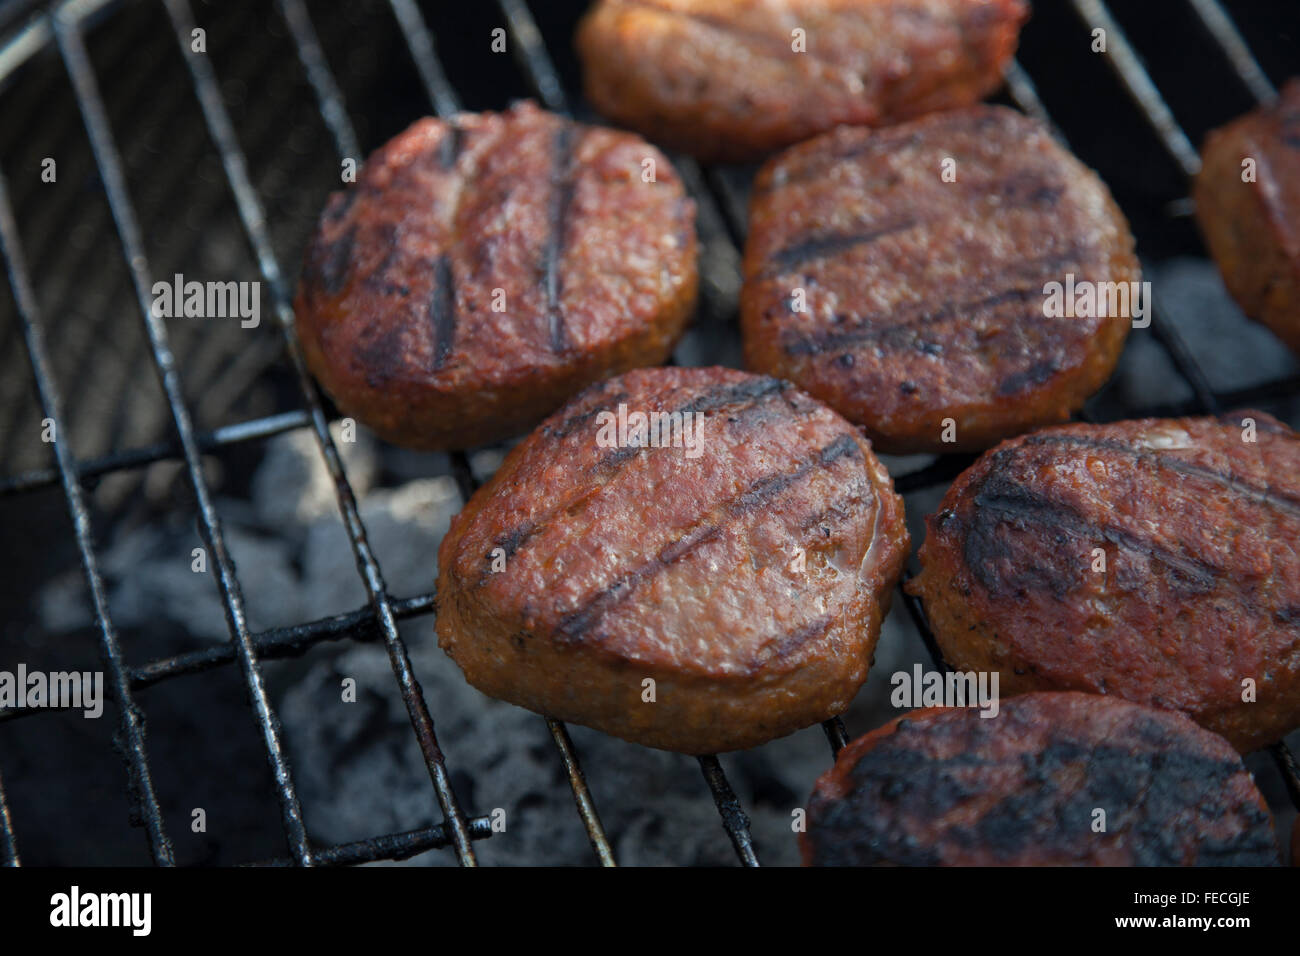 Beef Hamburgers on the grill Stock Photo